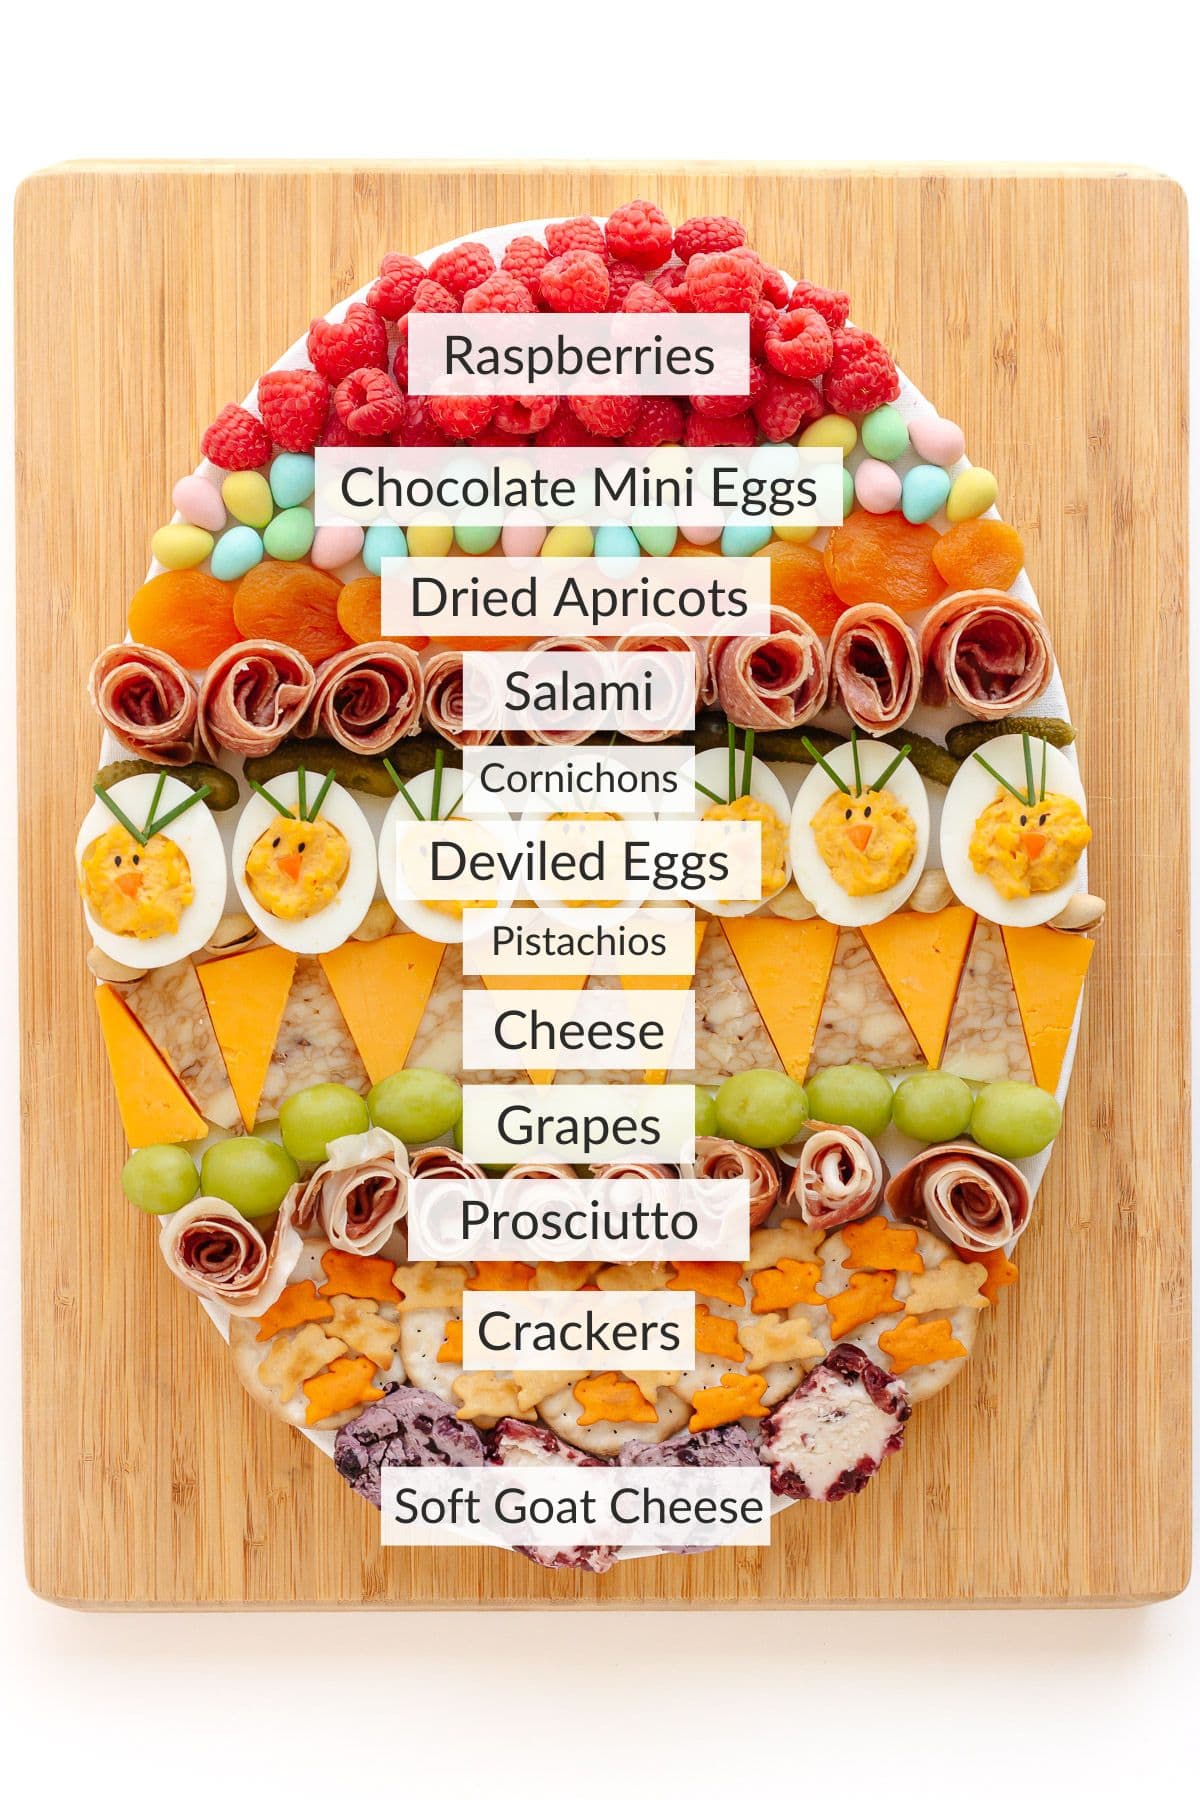 Easter egg shaped charcuterie board with labels describing what is in each row.